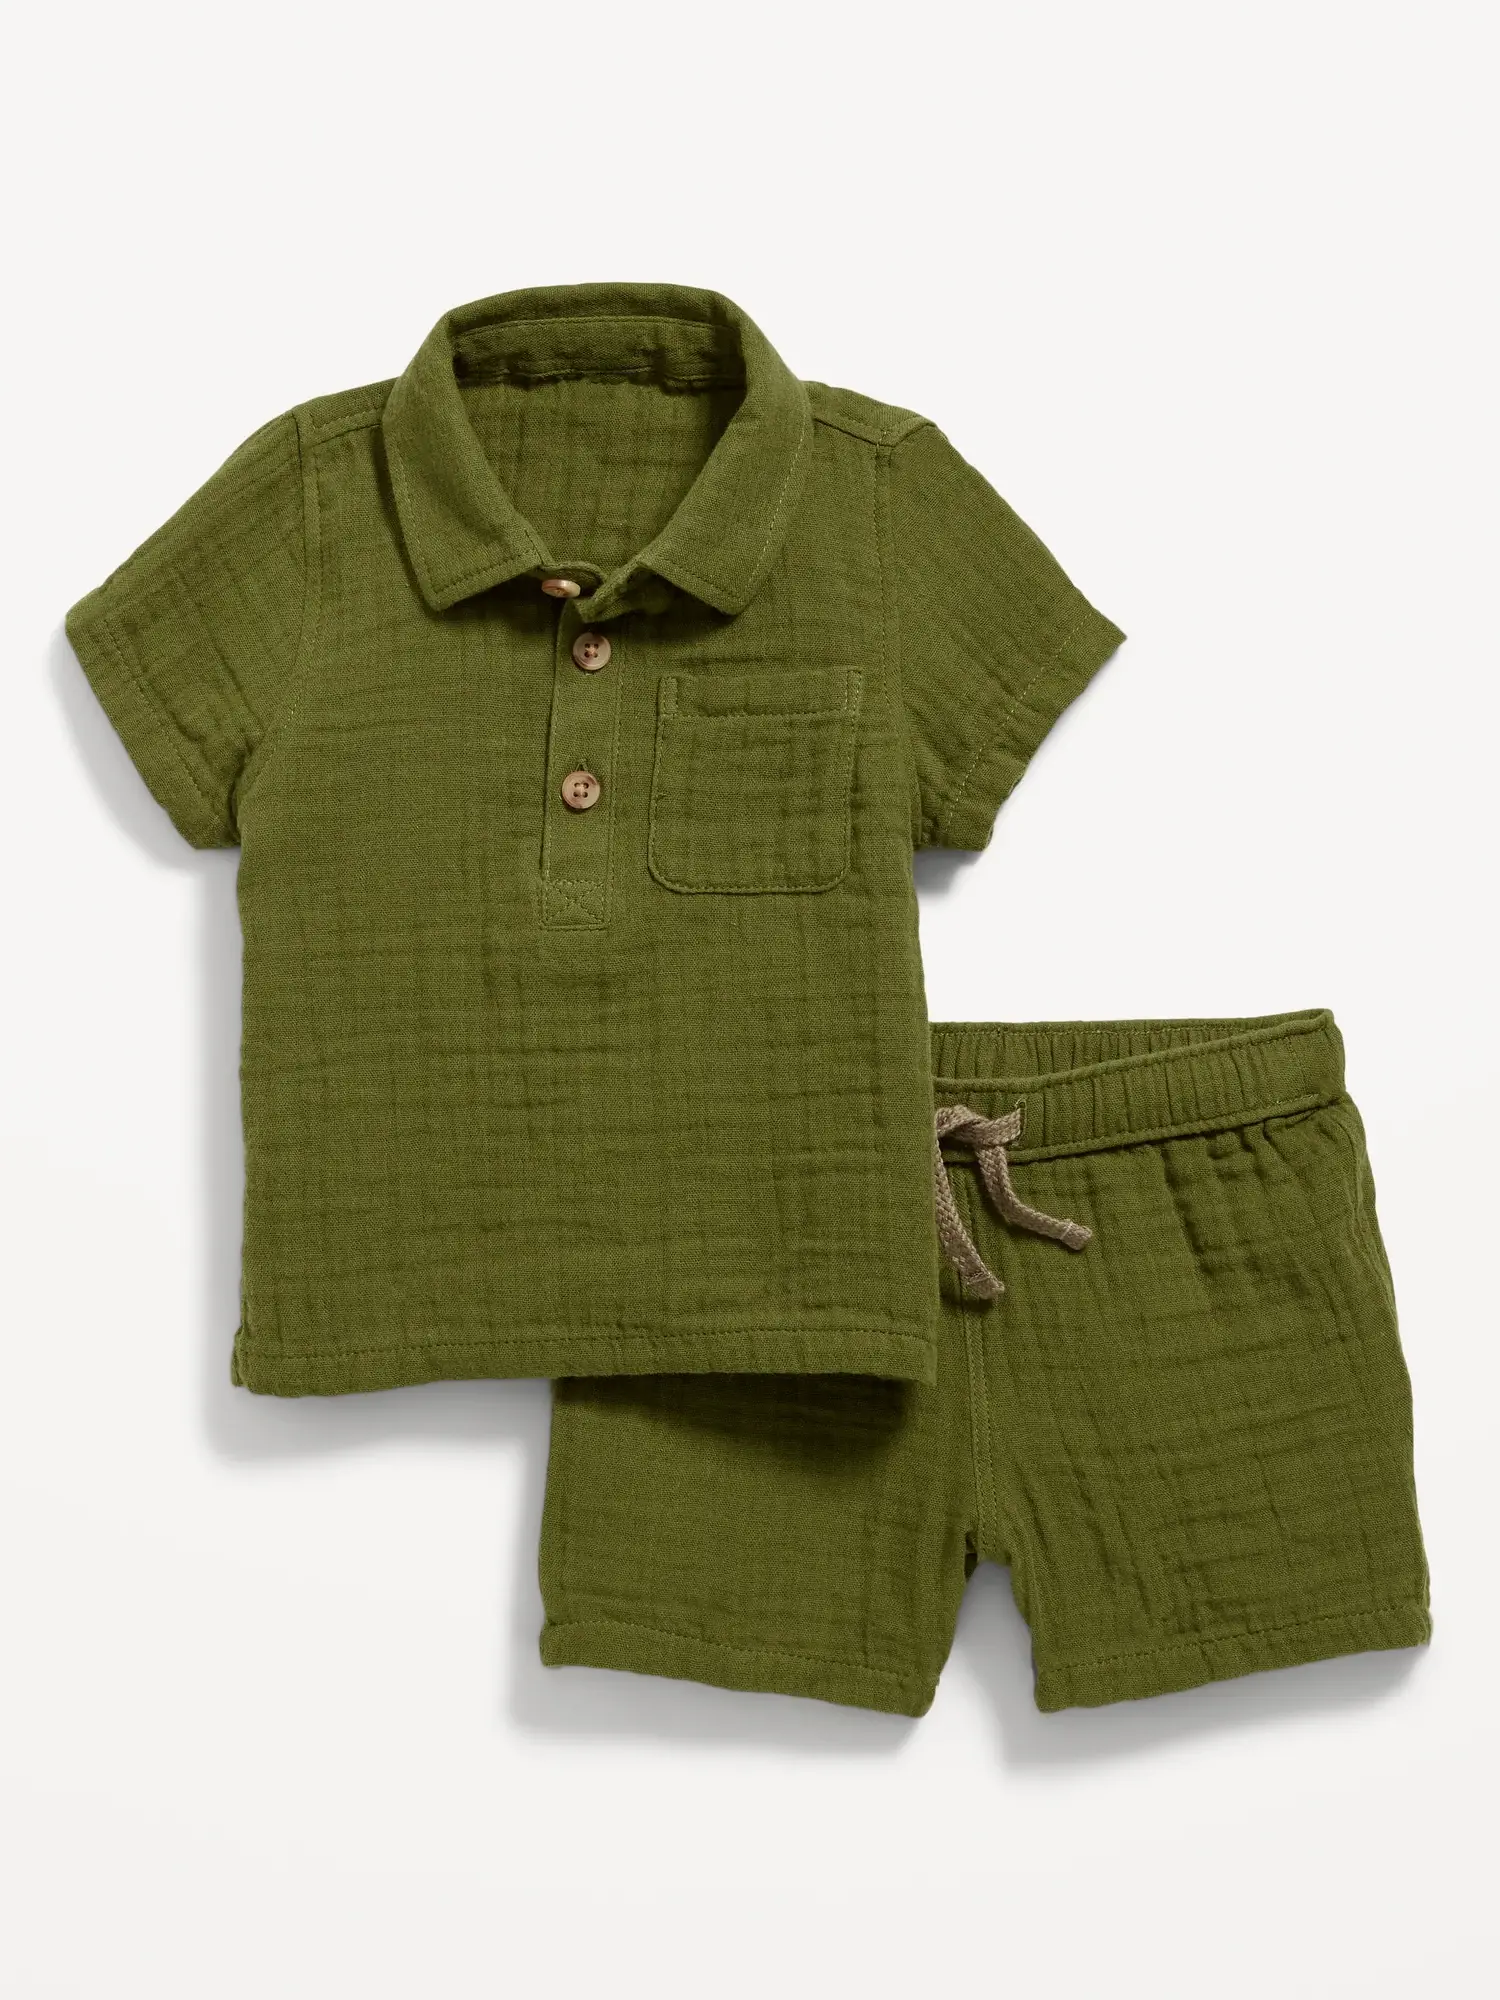 Old Navy Unisex Textured Double-Weave Shirt & Shorts Set for Baby green. 1